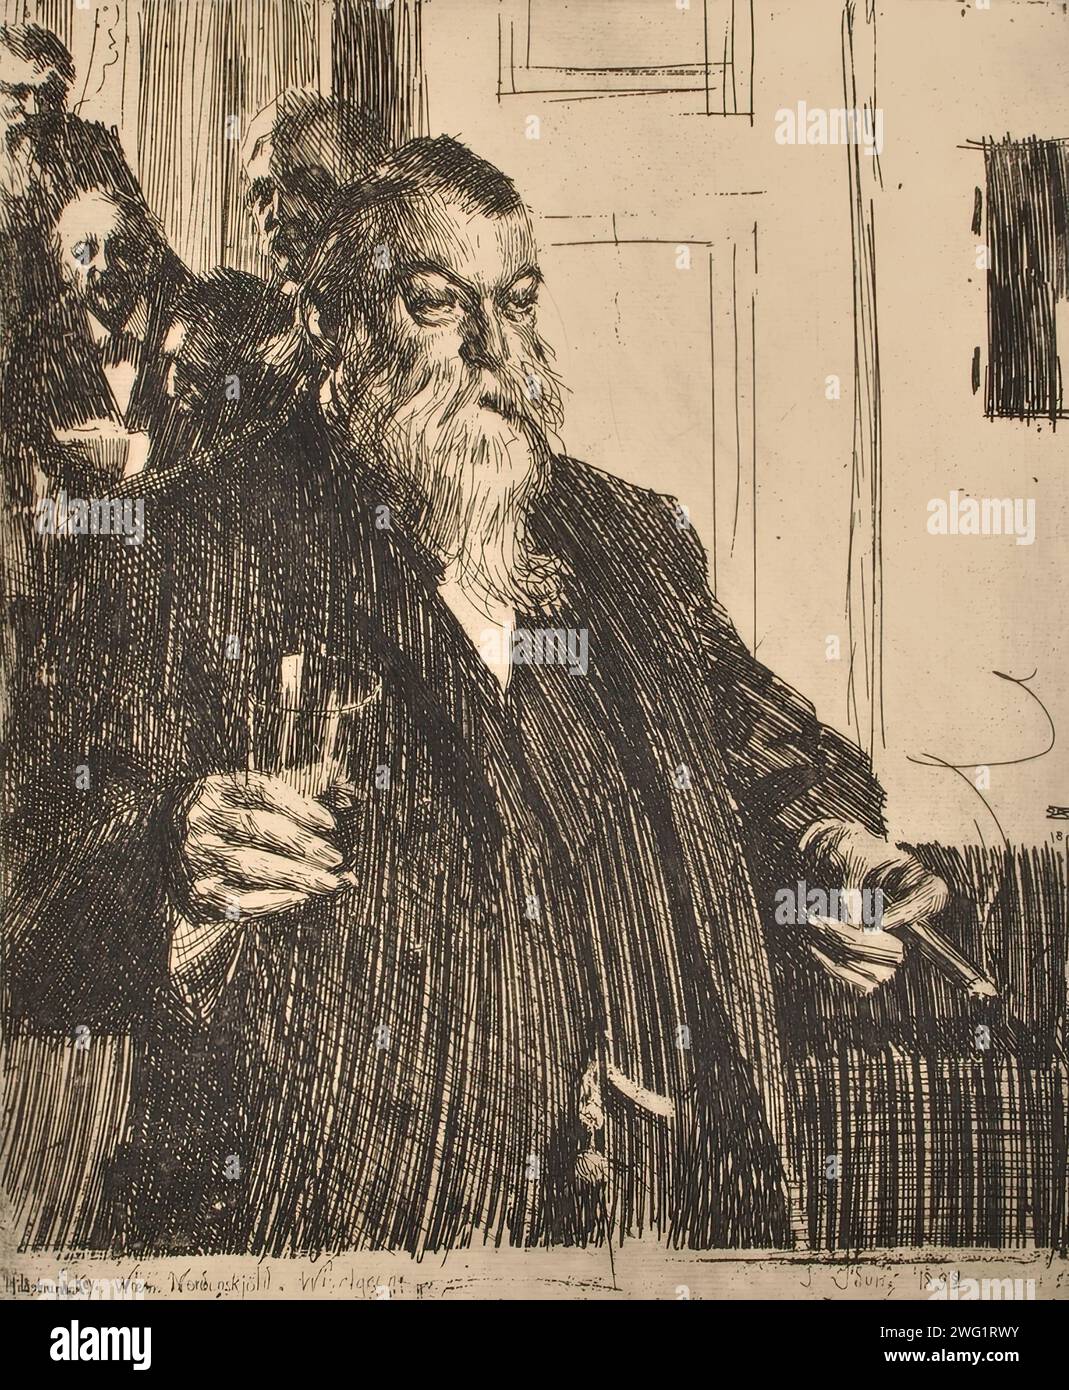 Portrait, 1893. Gentleman in full beard, fitted with cigar and goggles. In the background four more gentlemen can be seen in the adjoining room. Stock Photo